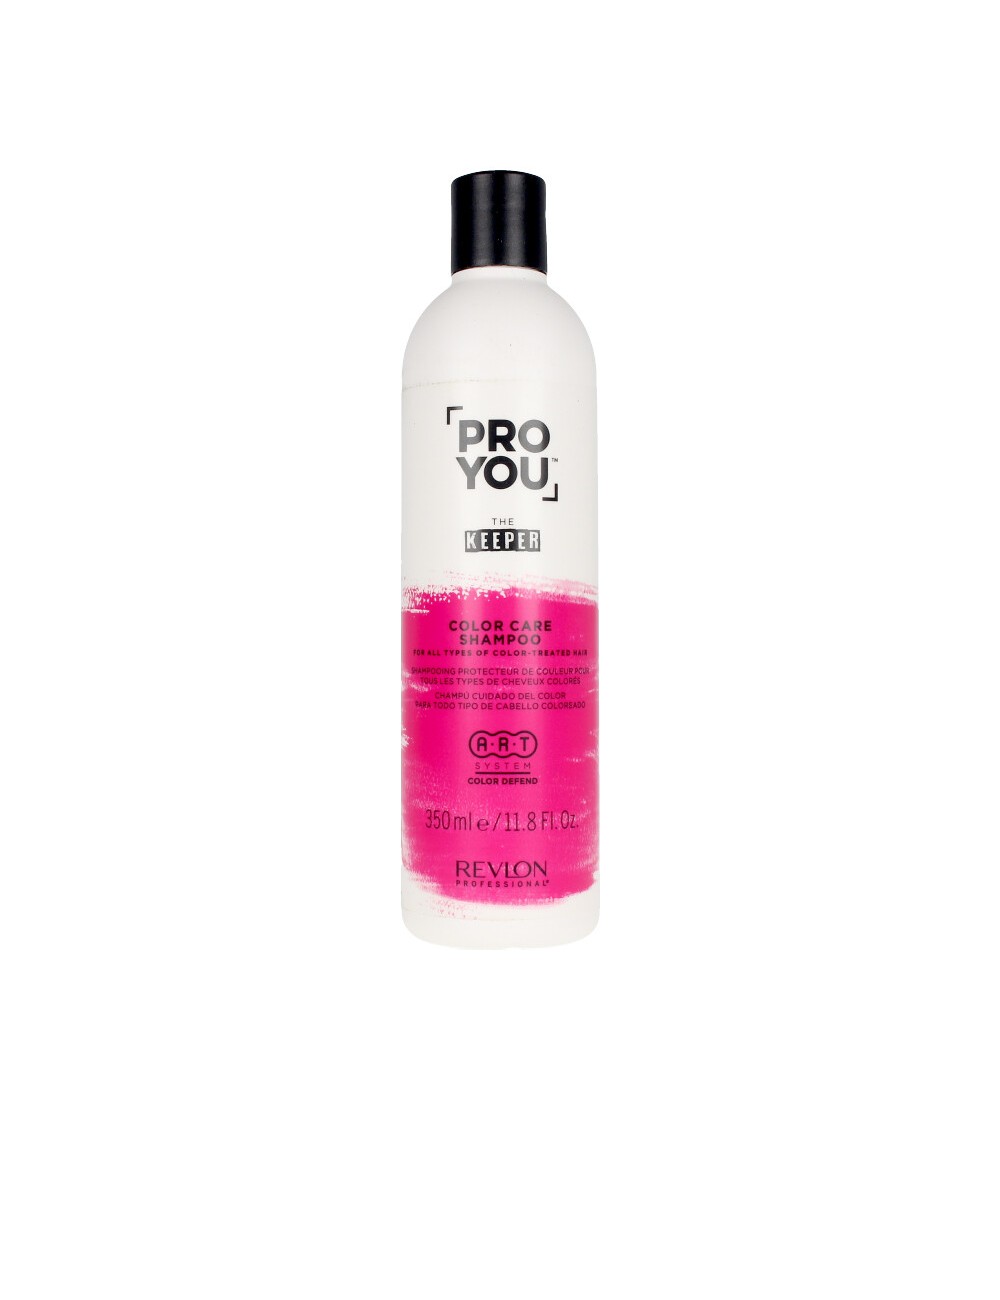 PROYOU the keeper Shampooing protecteur couleur